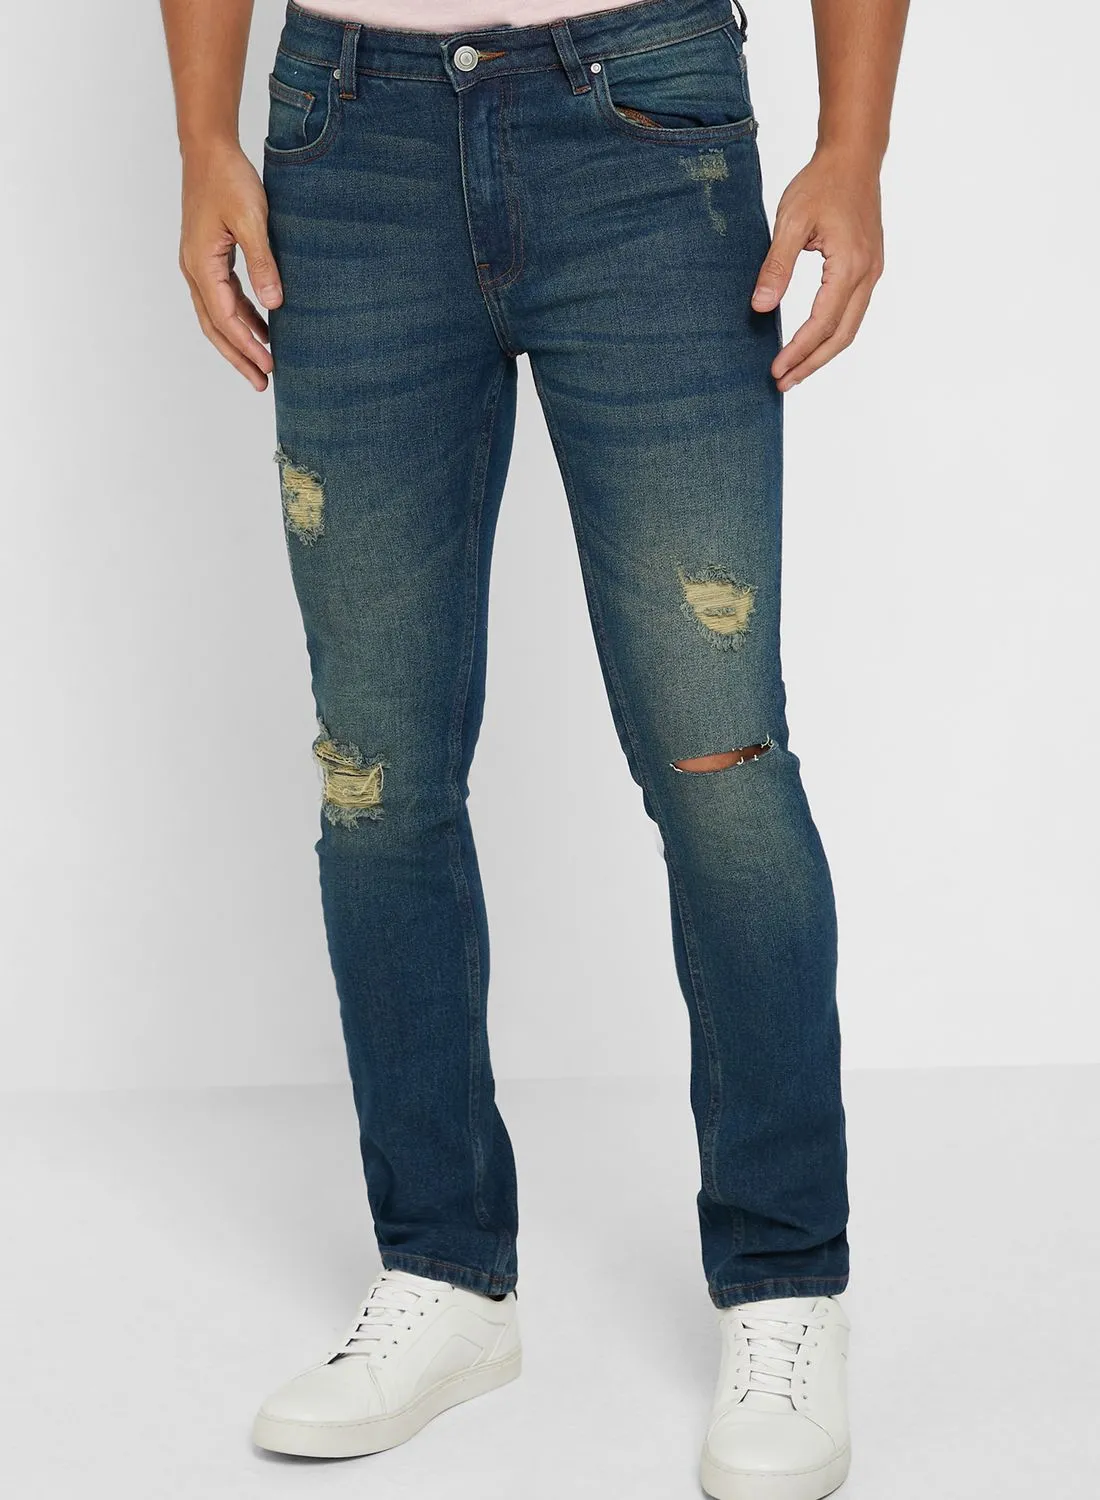 Seventy Five Slim Fit Ripped Jeans